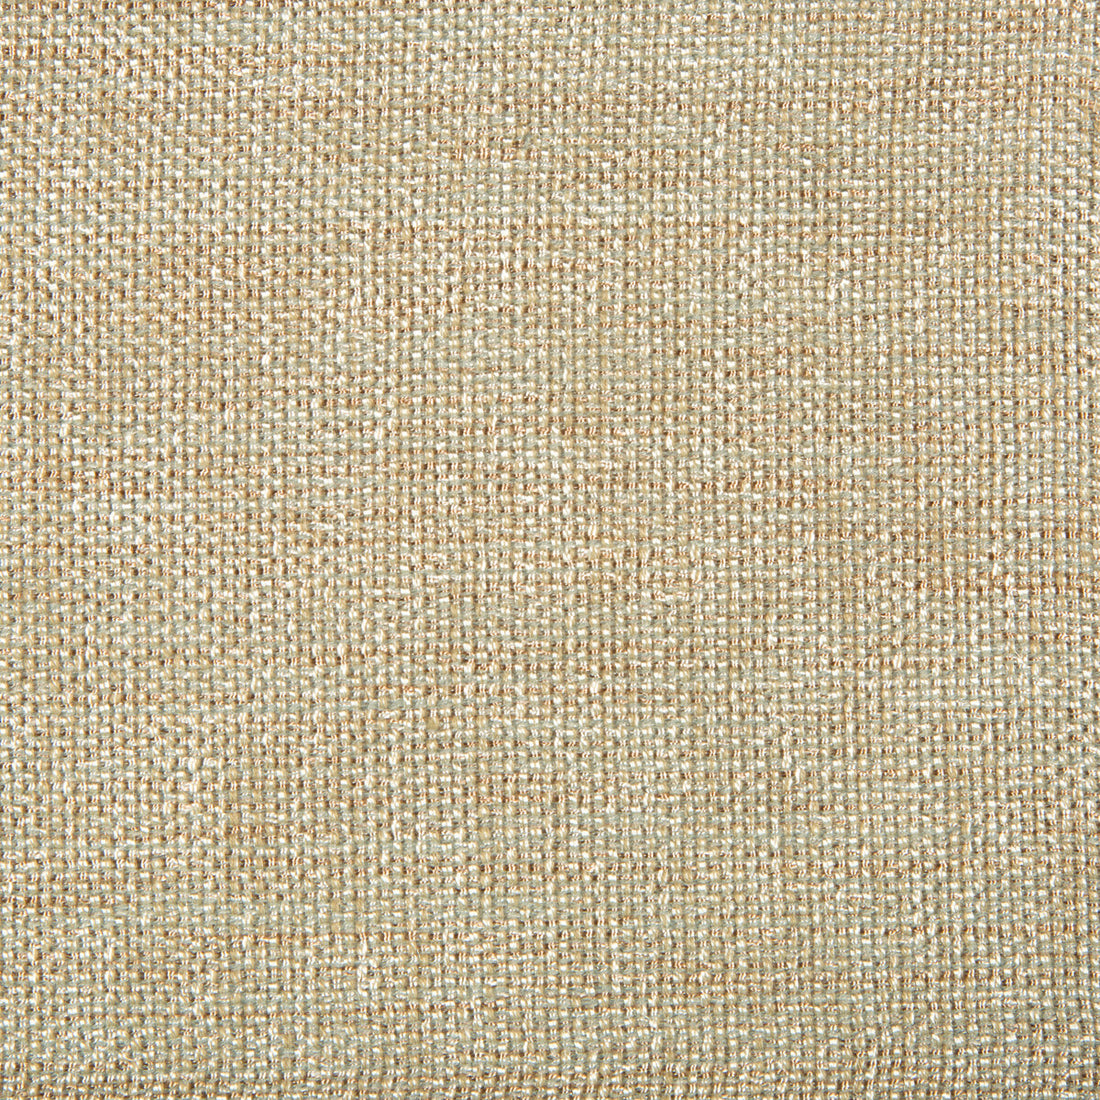 Kravet Contract fabric in 4458-415 color - pattern 4458.415.0 - by Kravet Contract